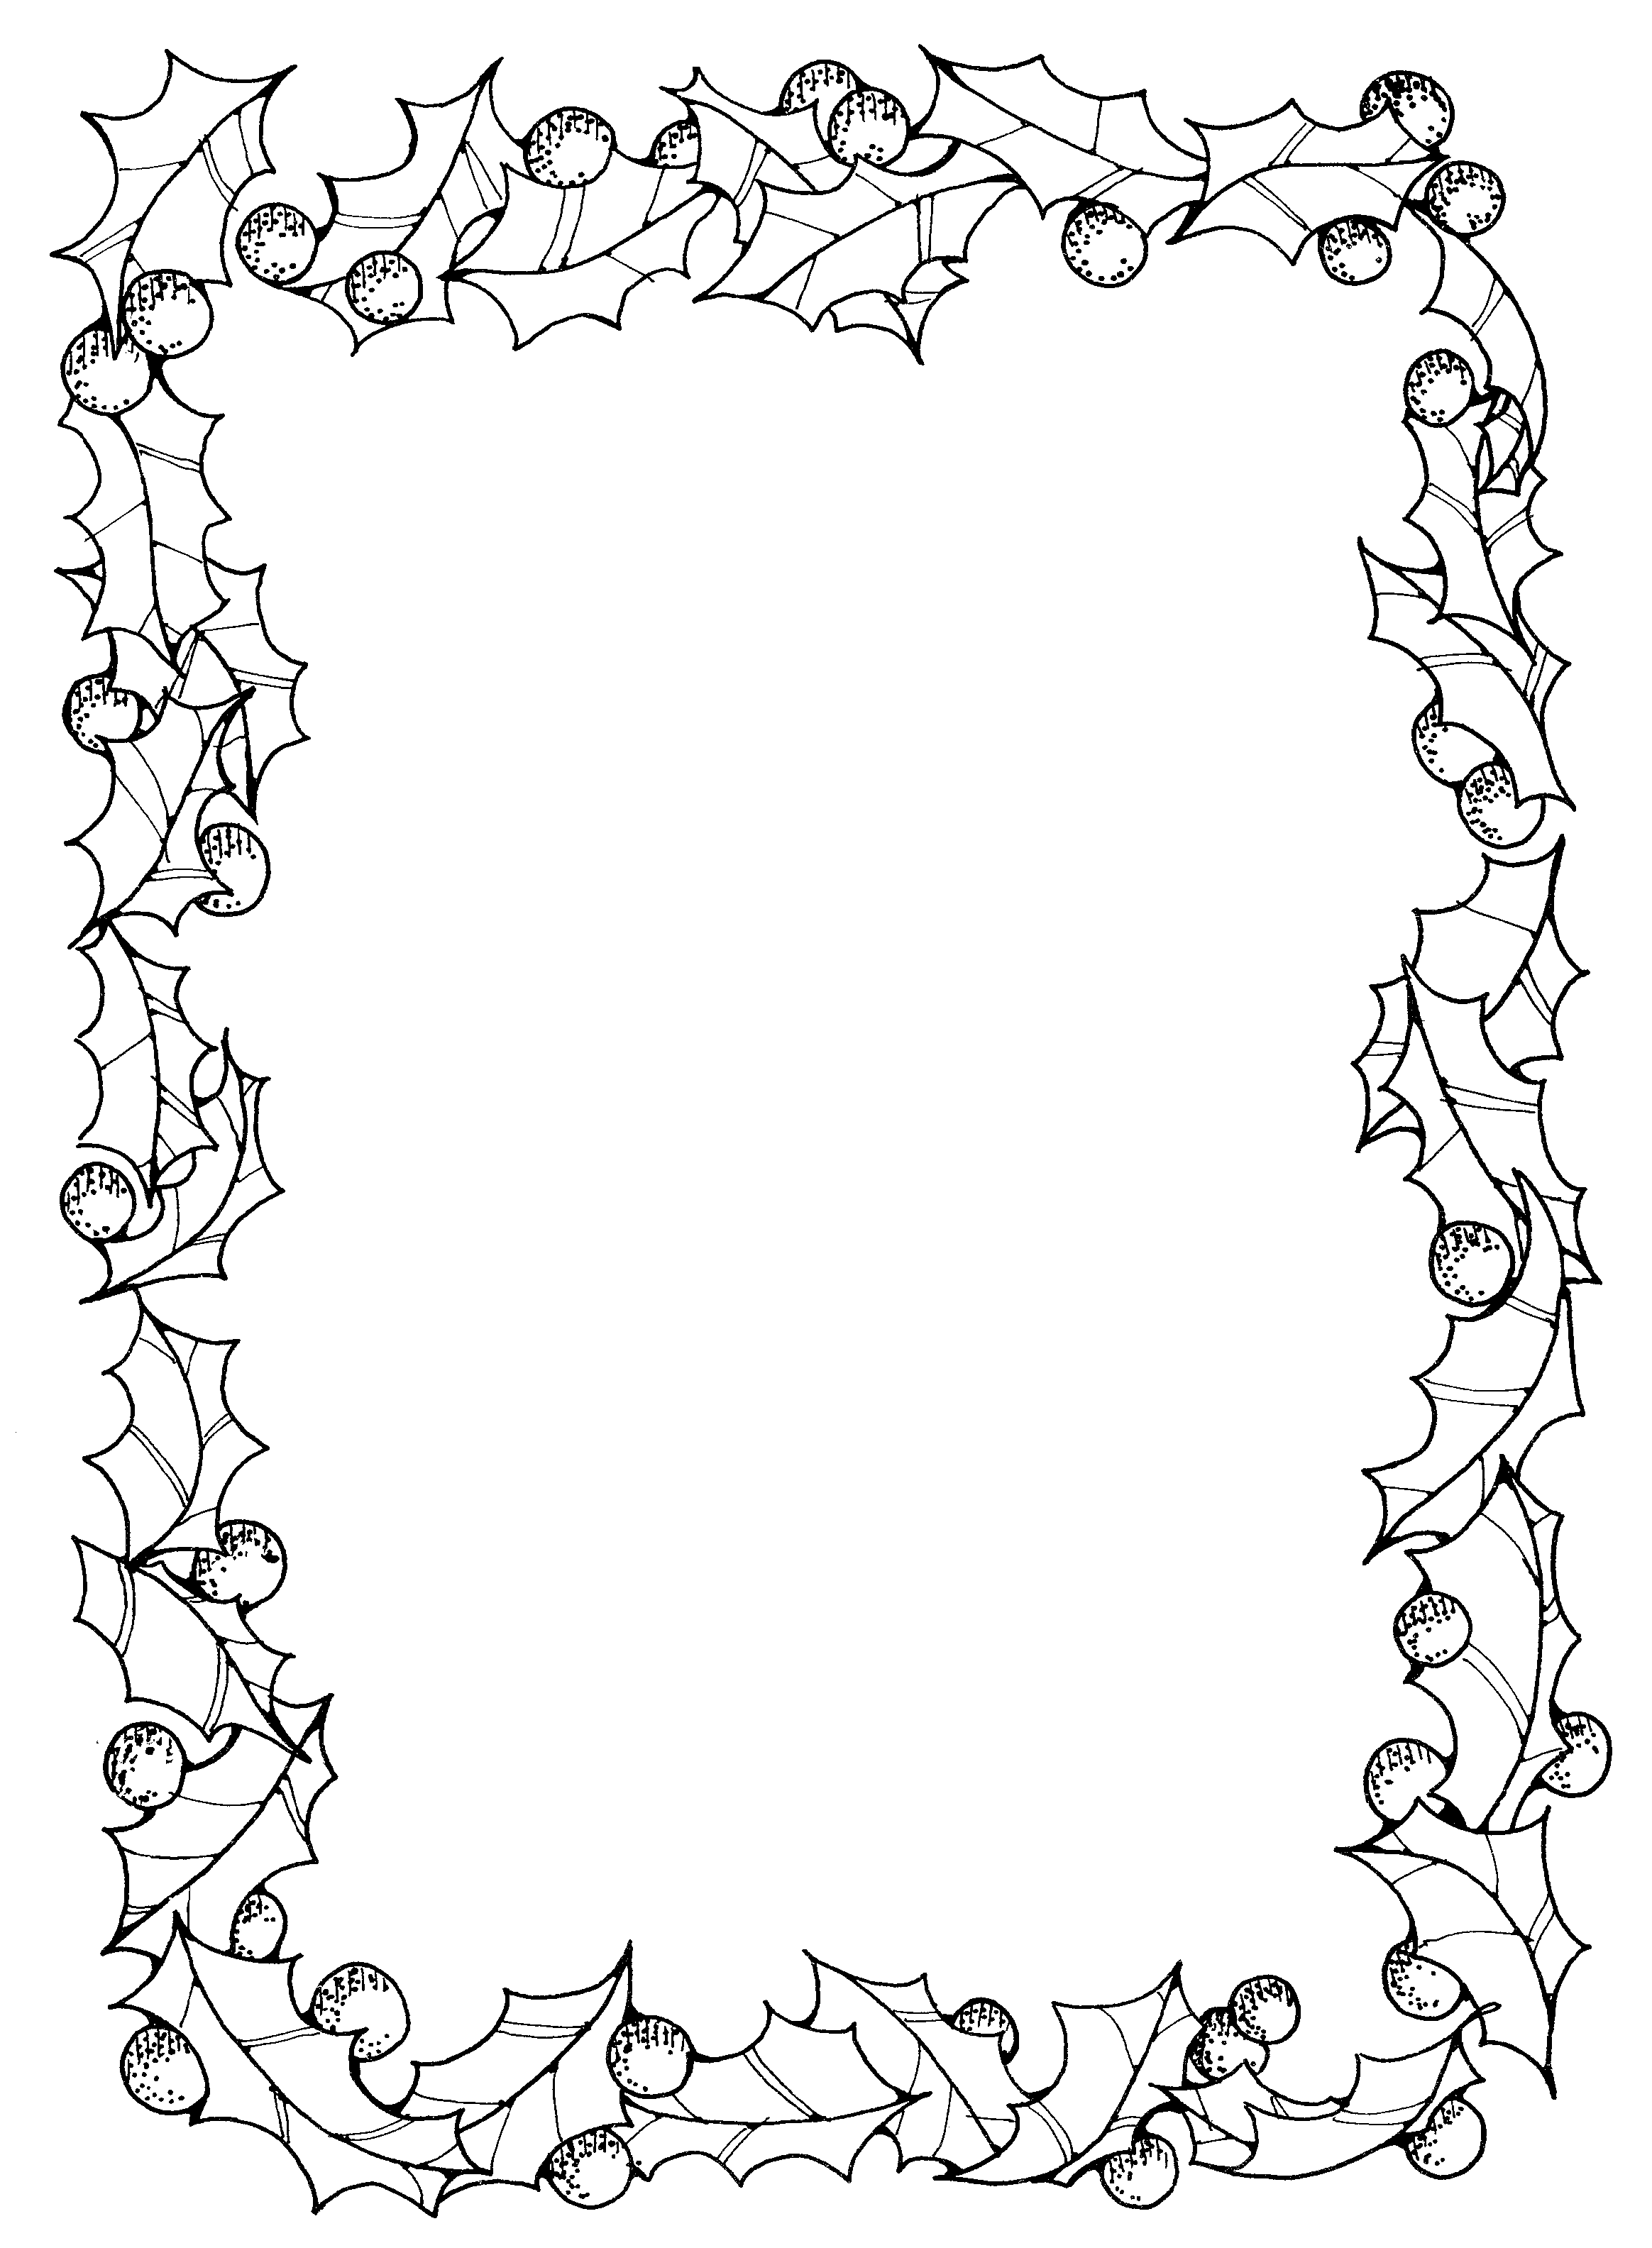 Border In Black And White - Clipart library